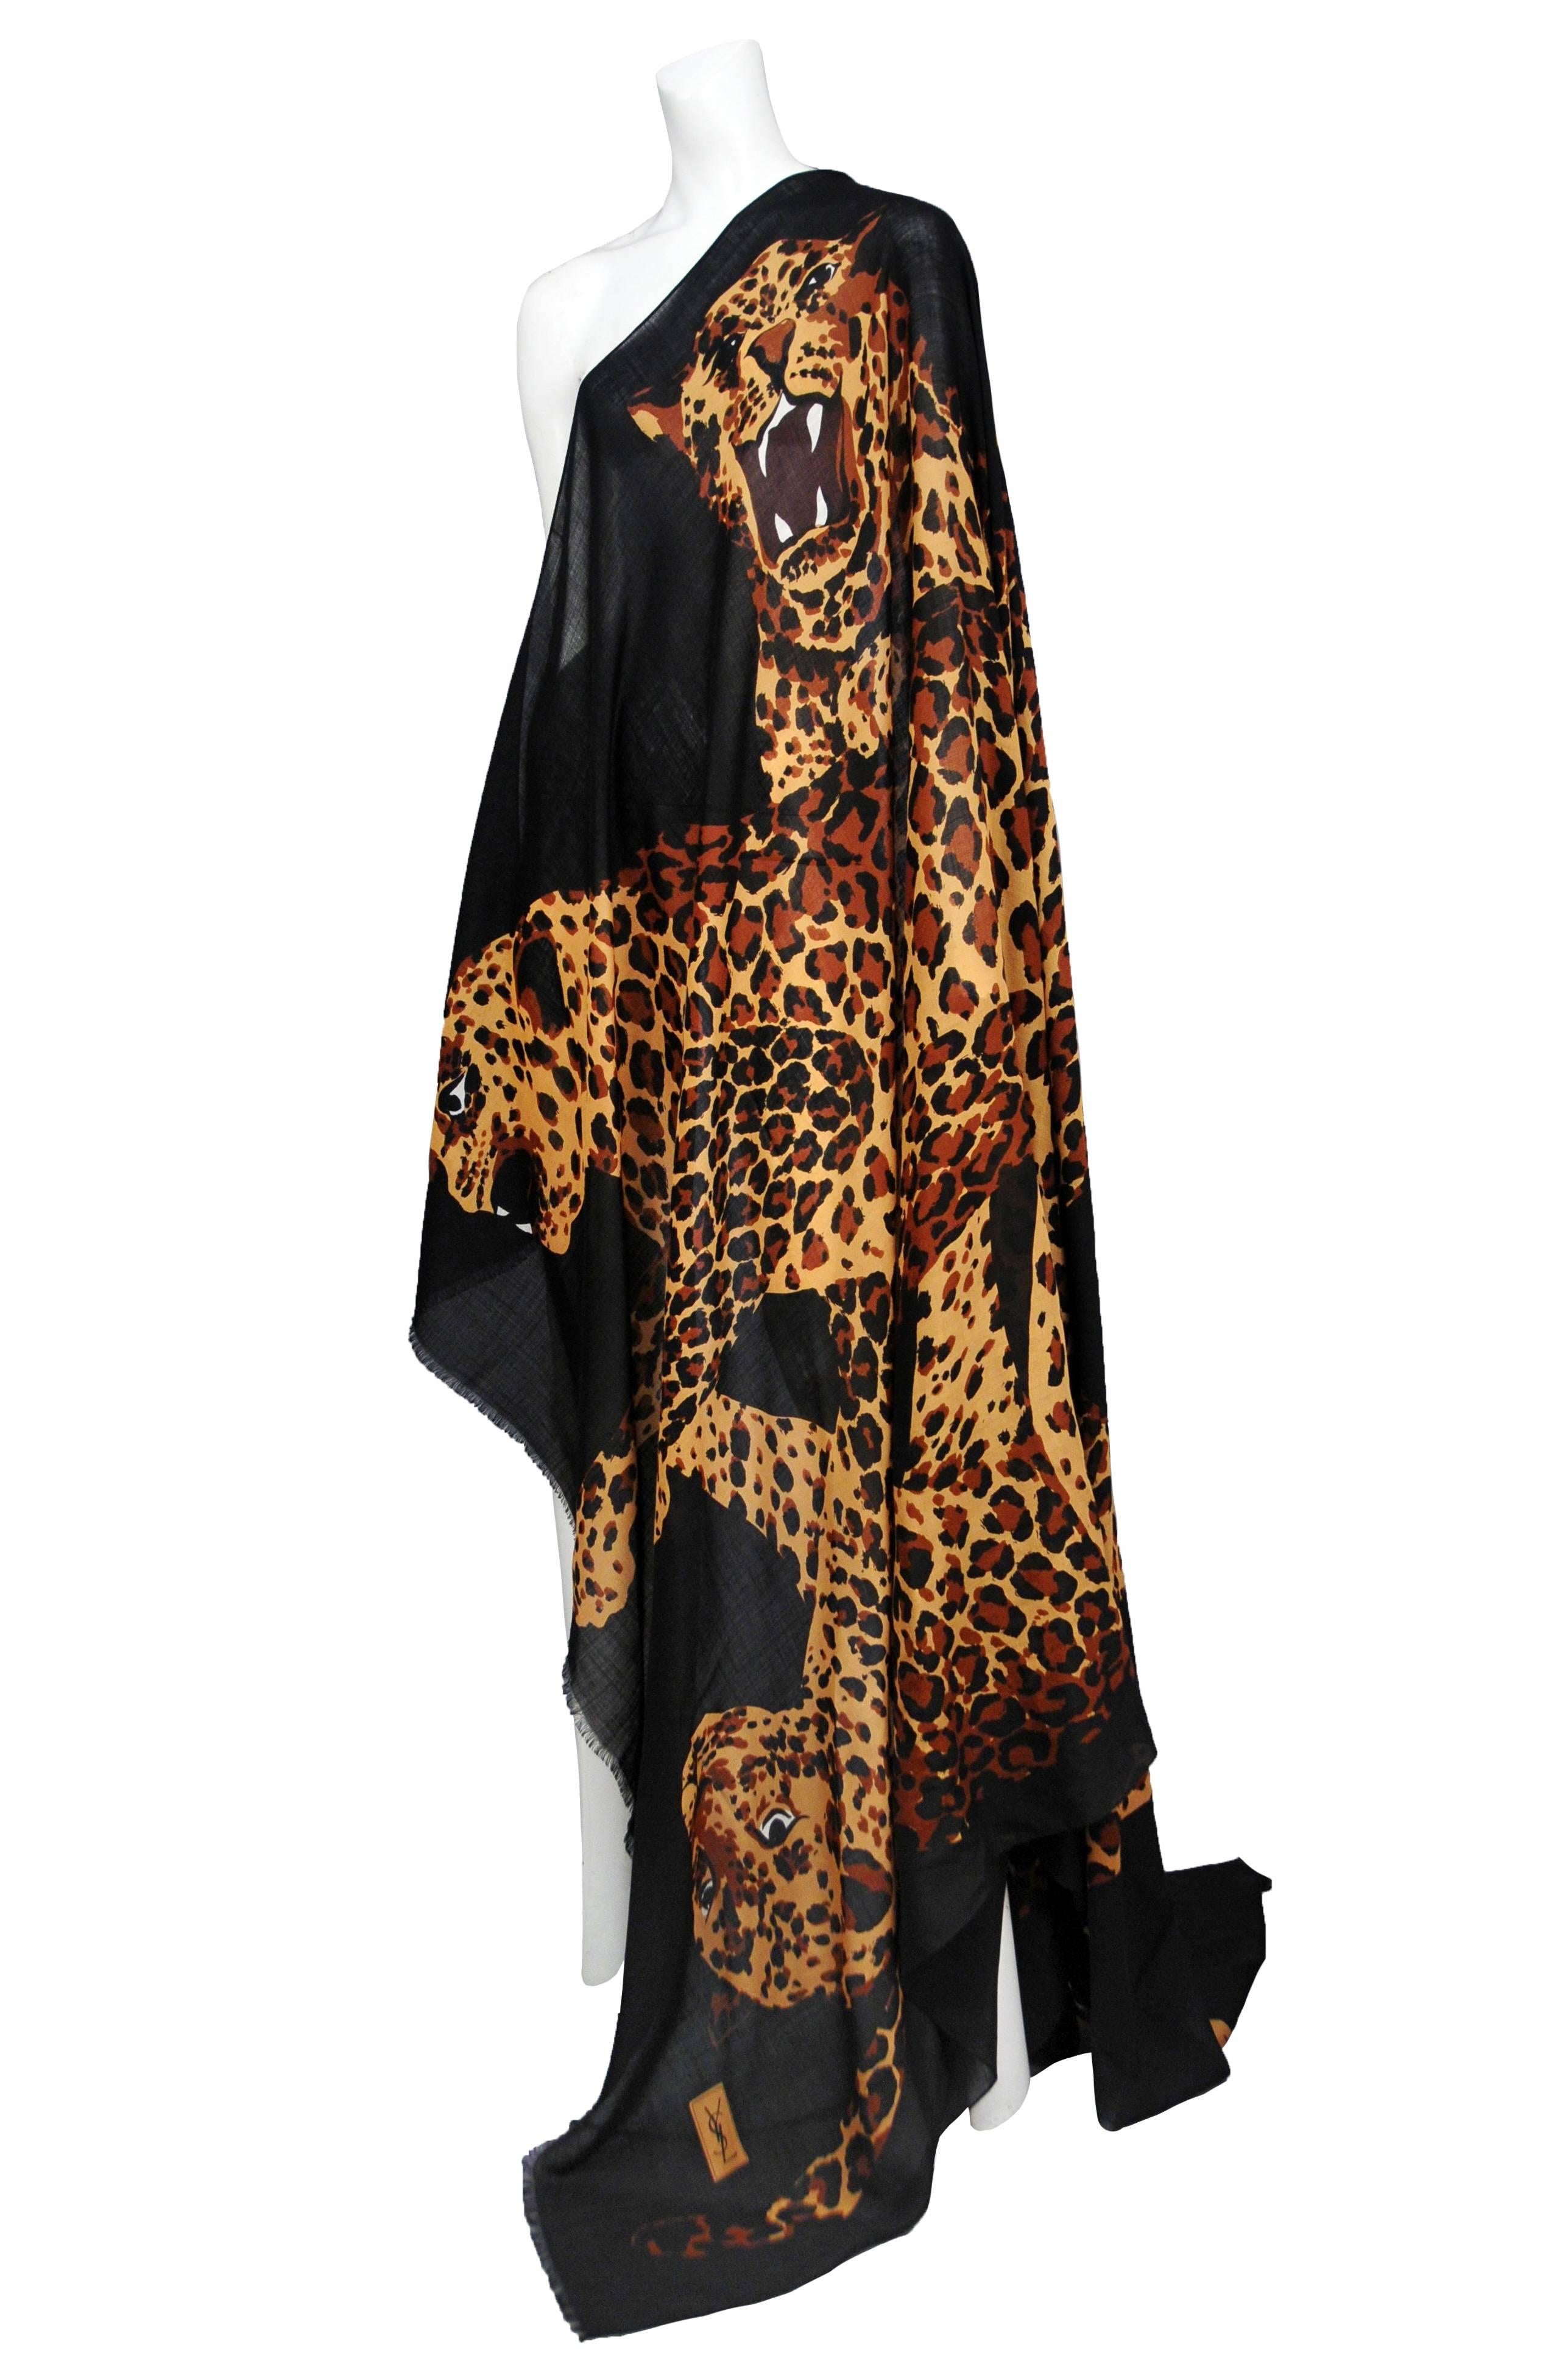 Vintage Yves Saint Laurent wool and silk blend scarf featuring leopards printed on a black background. Circa 1986. Featured in runway show. 